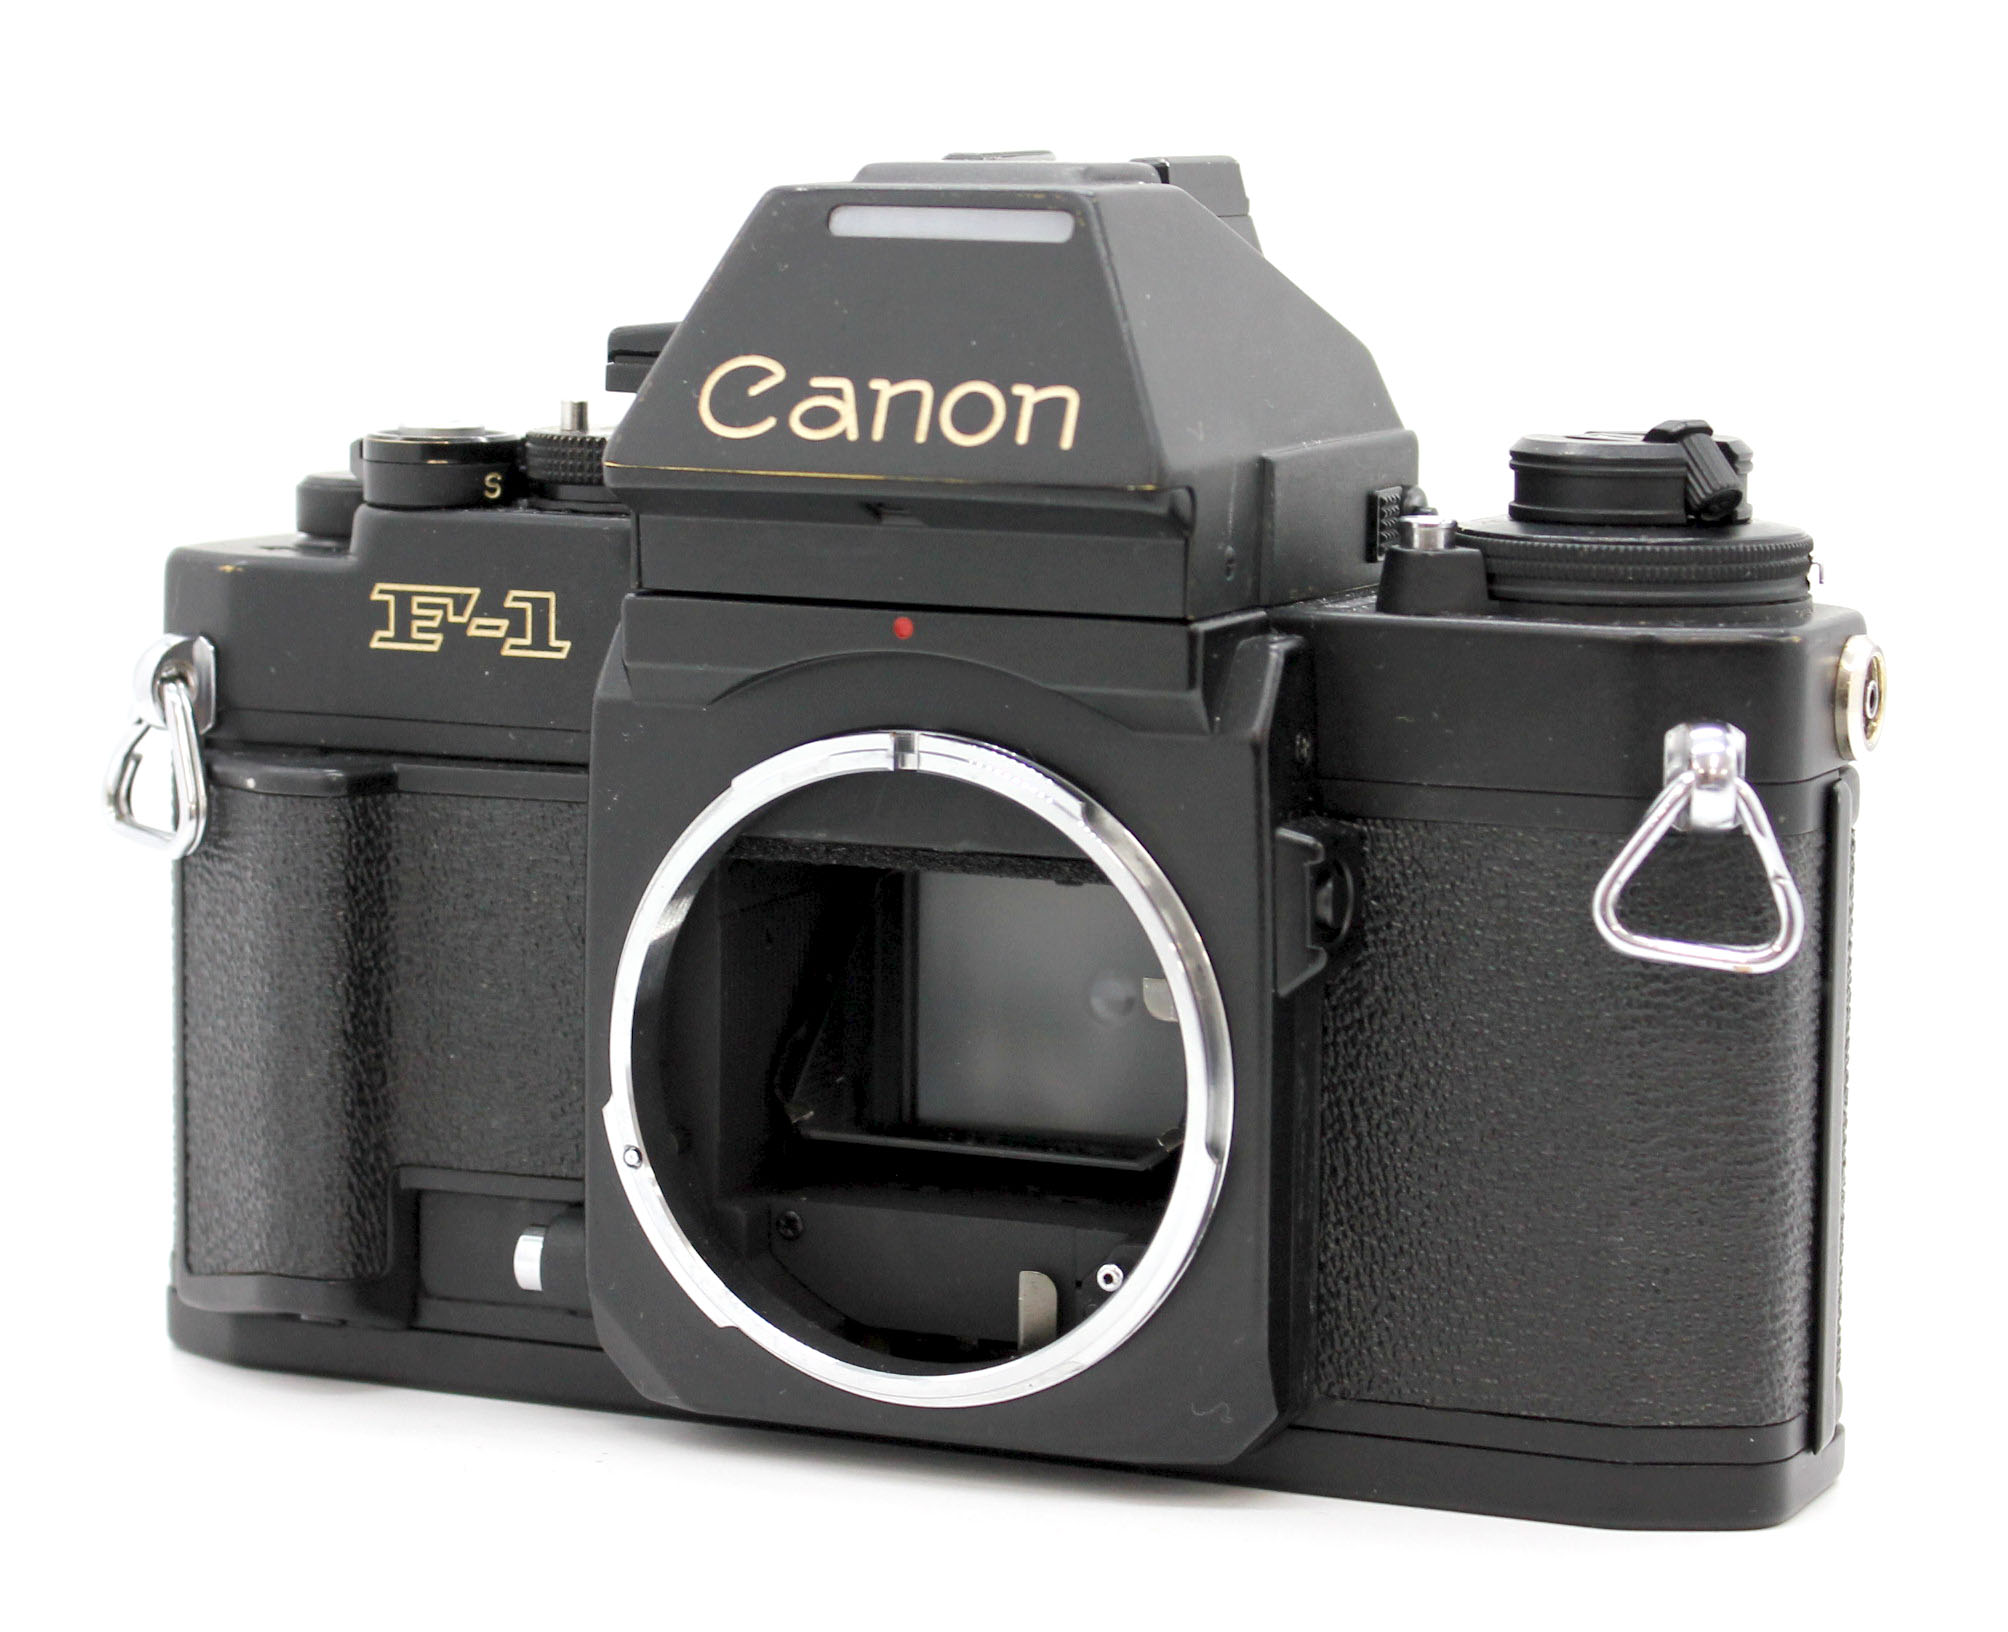  Canon New F-1 AE Finder 35mm SLR Film Camera with FD 50mm F/1.4 S.S.C. Lens from Japan Photo 1